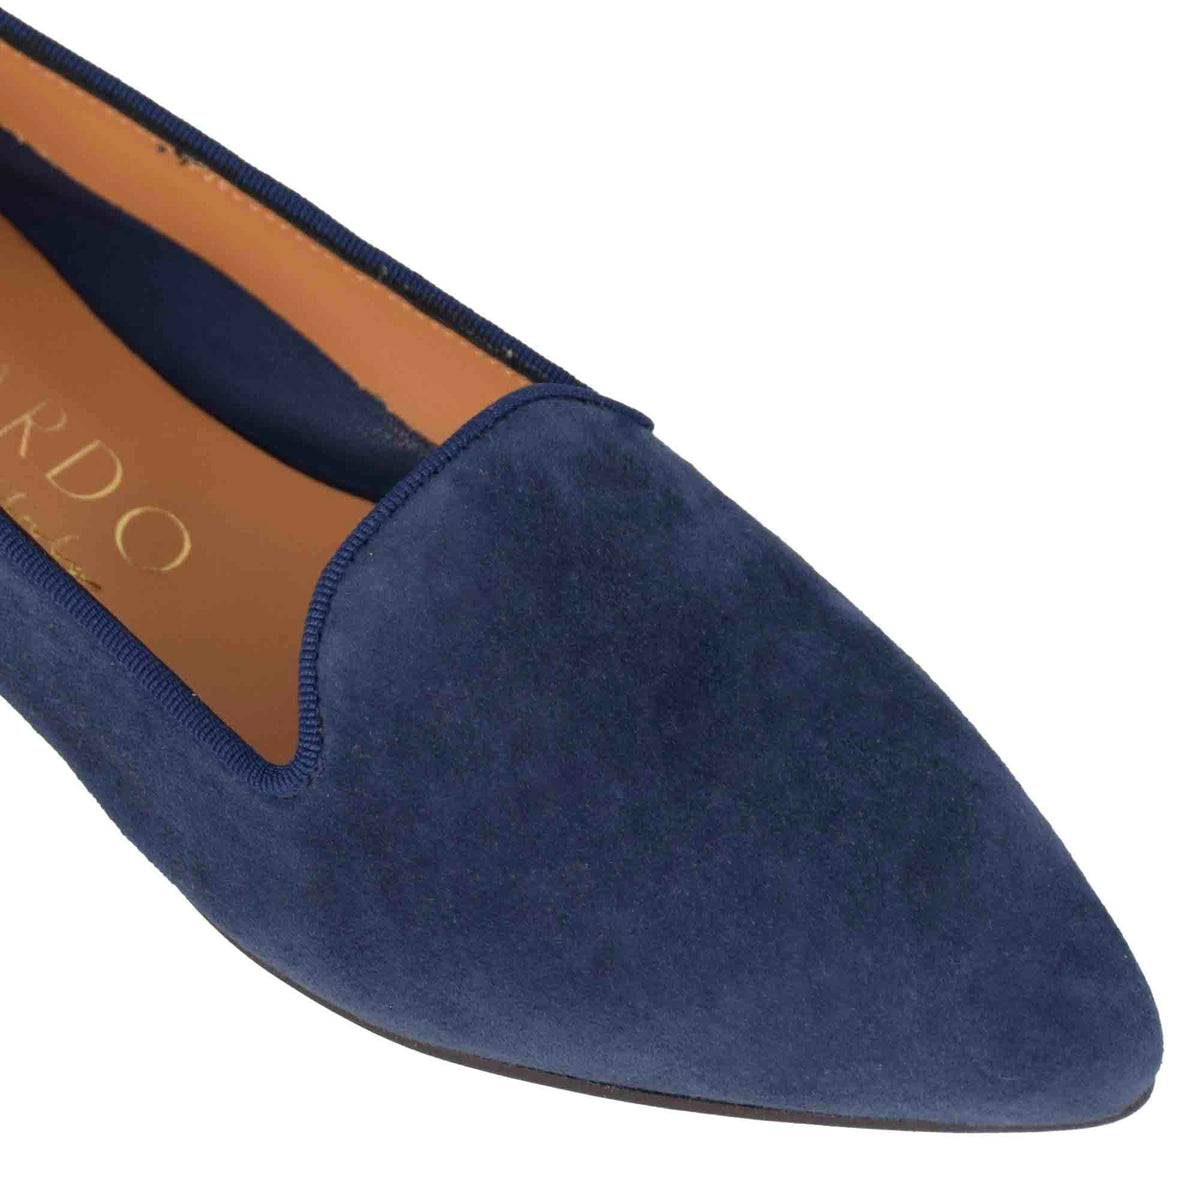 Pointed ballerina shoes for women in blue suede